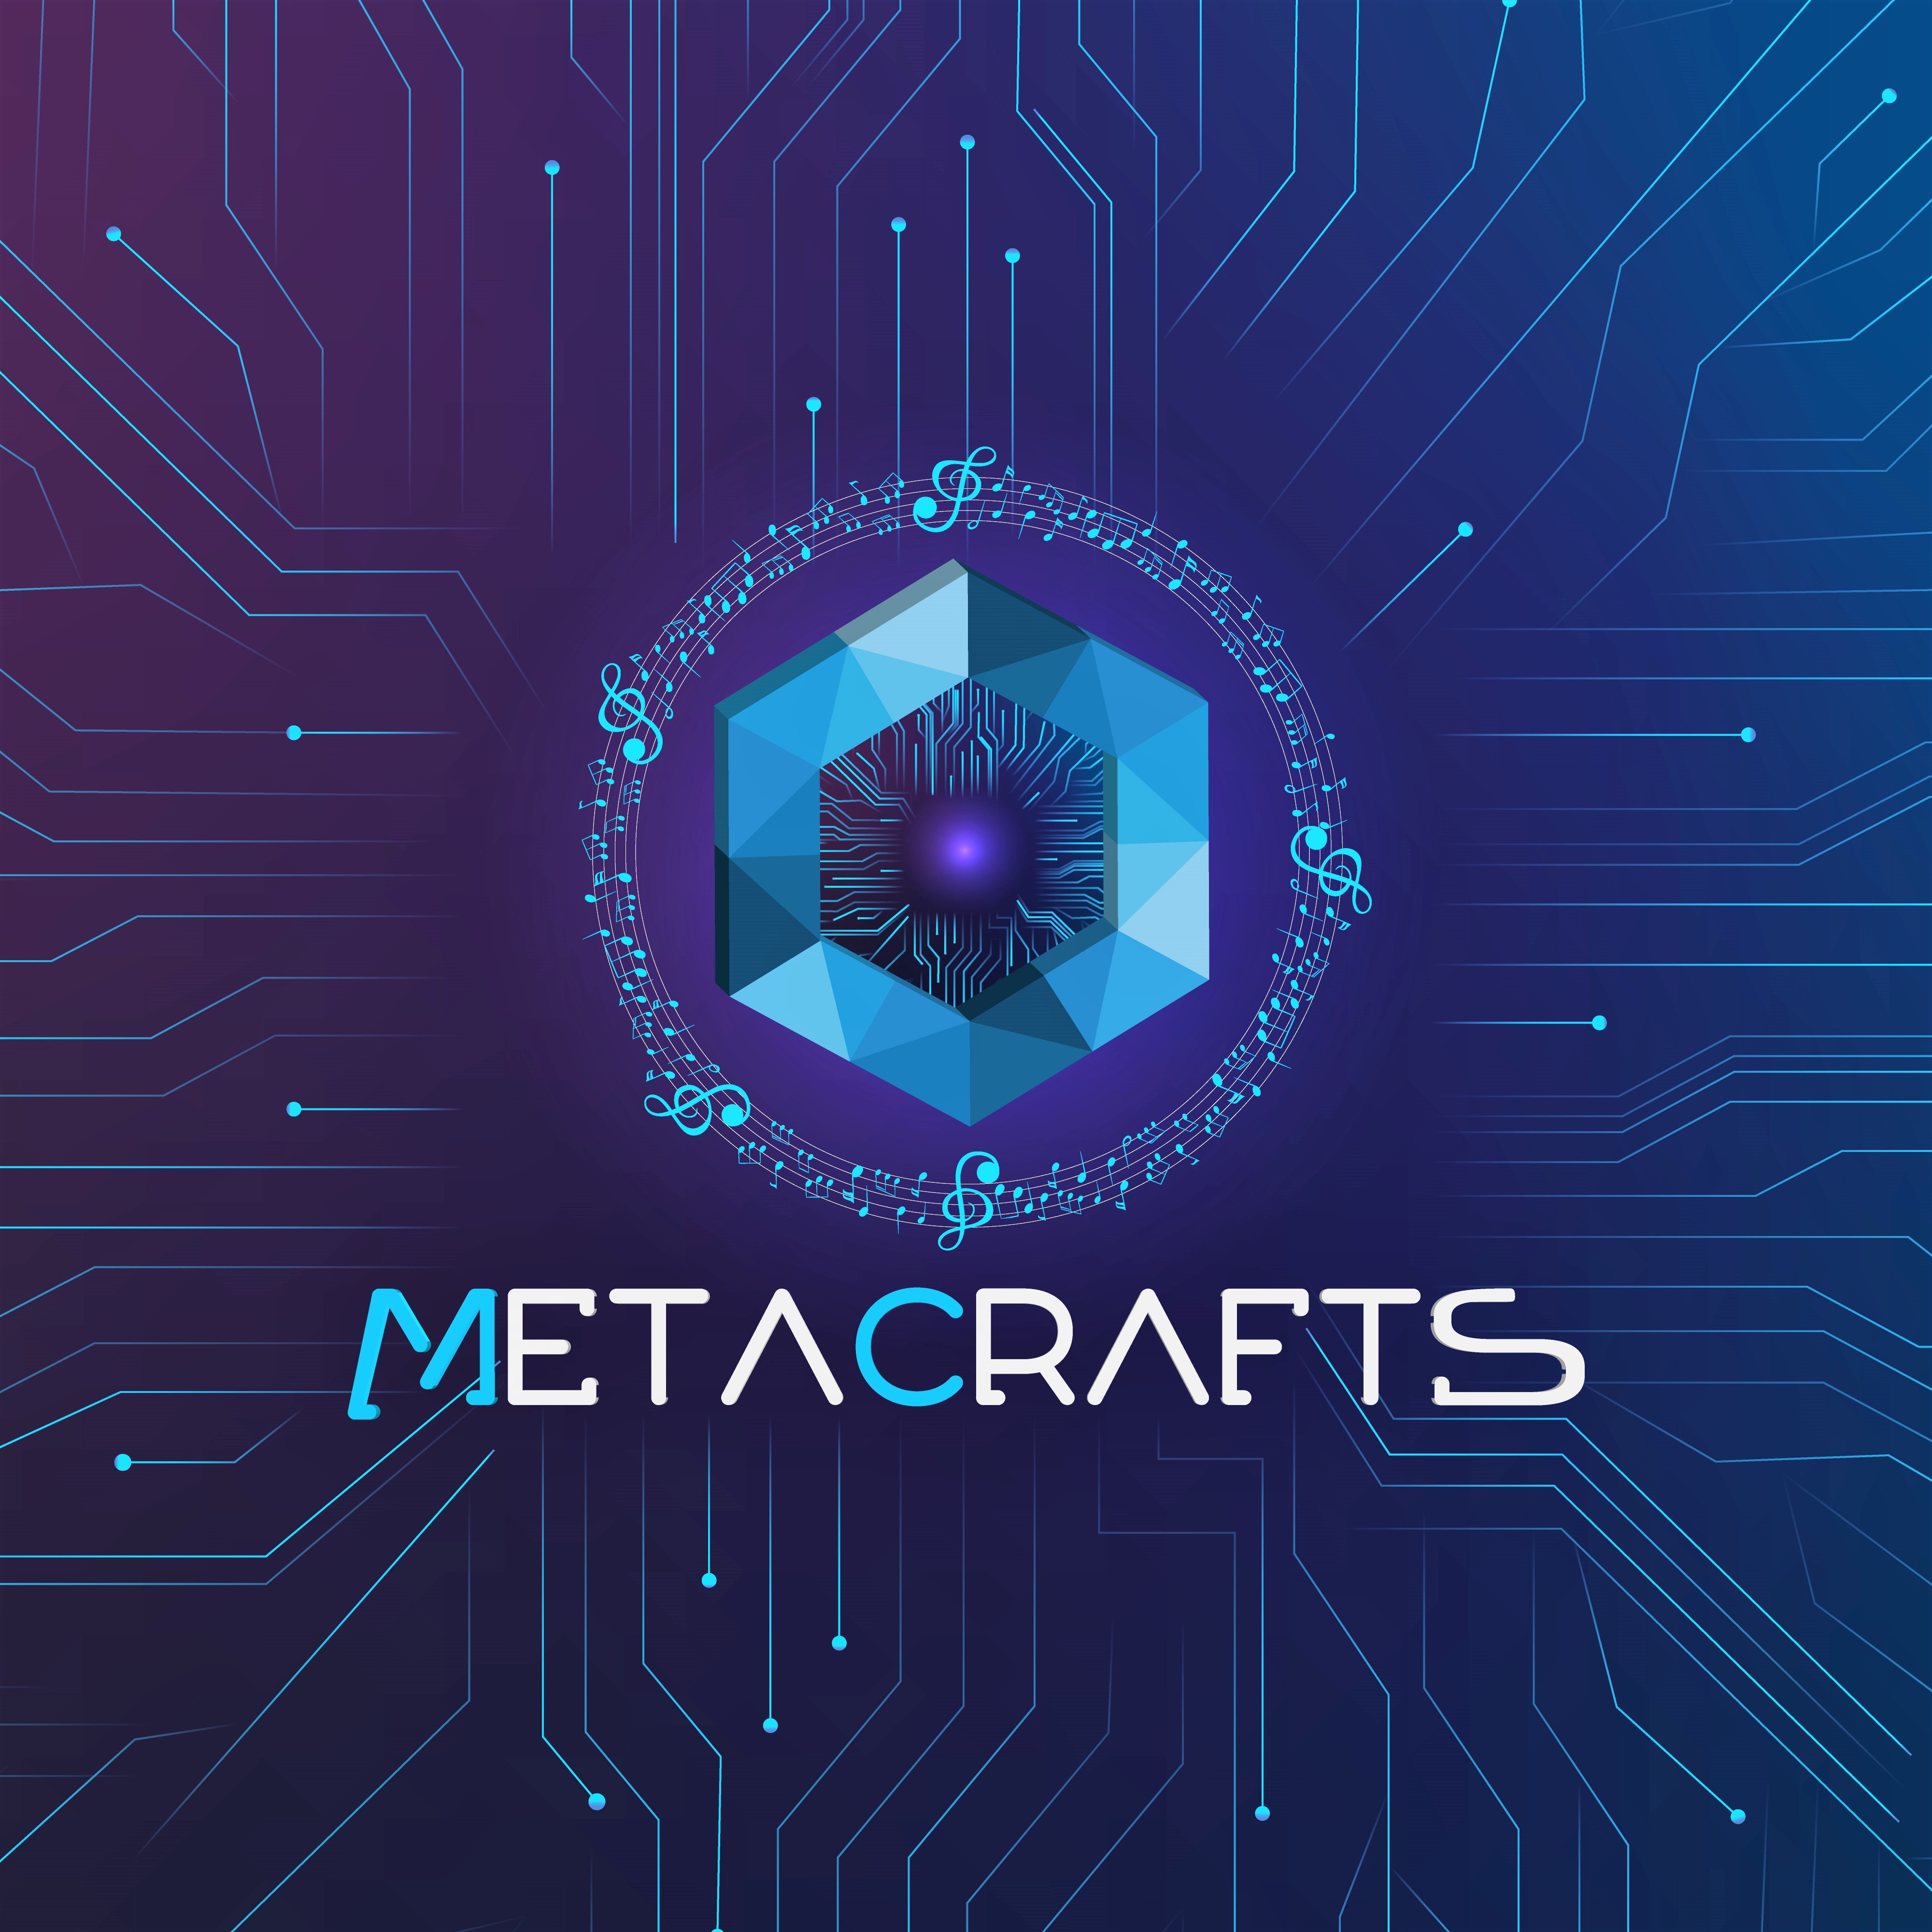 The Most Modern Subsequent-Technology NFT Music & Artwork- METACRAFTS Set to Take Over the Metaverse